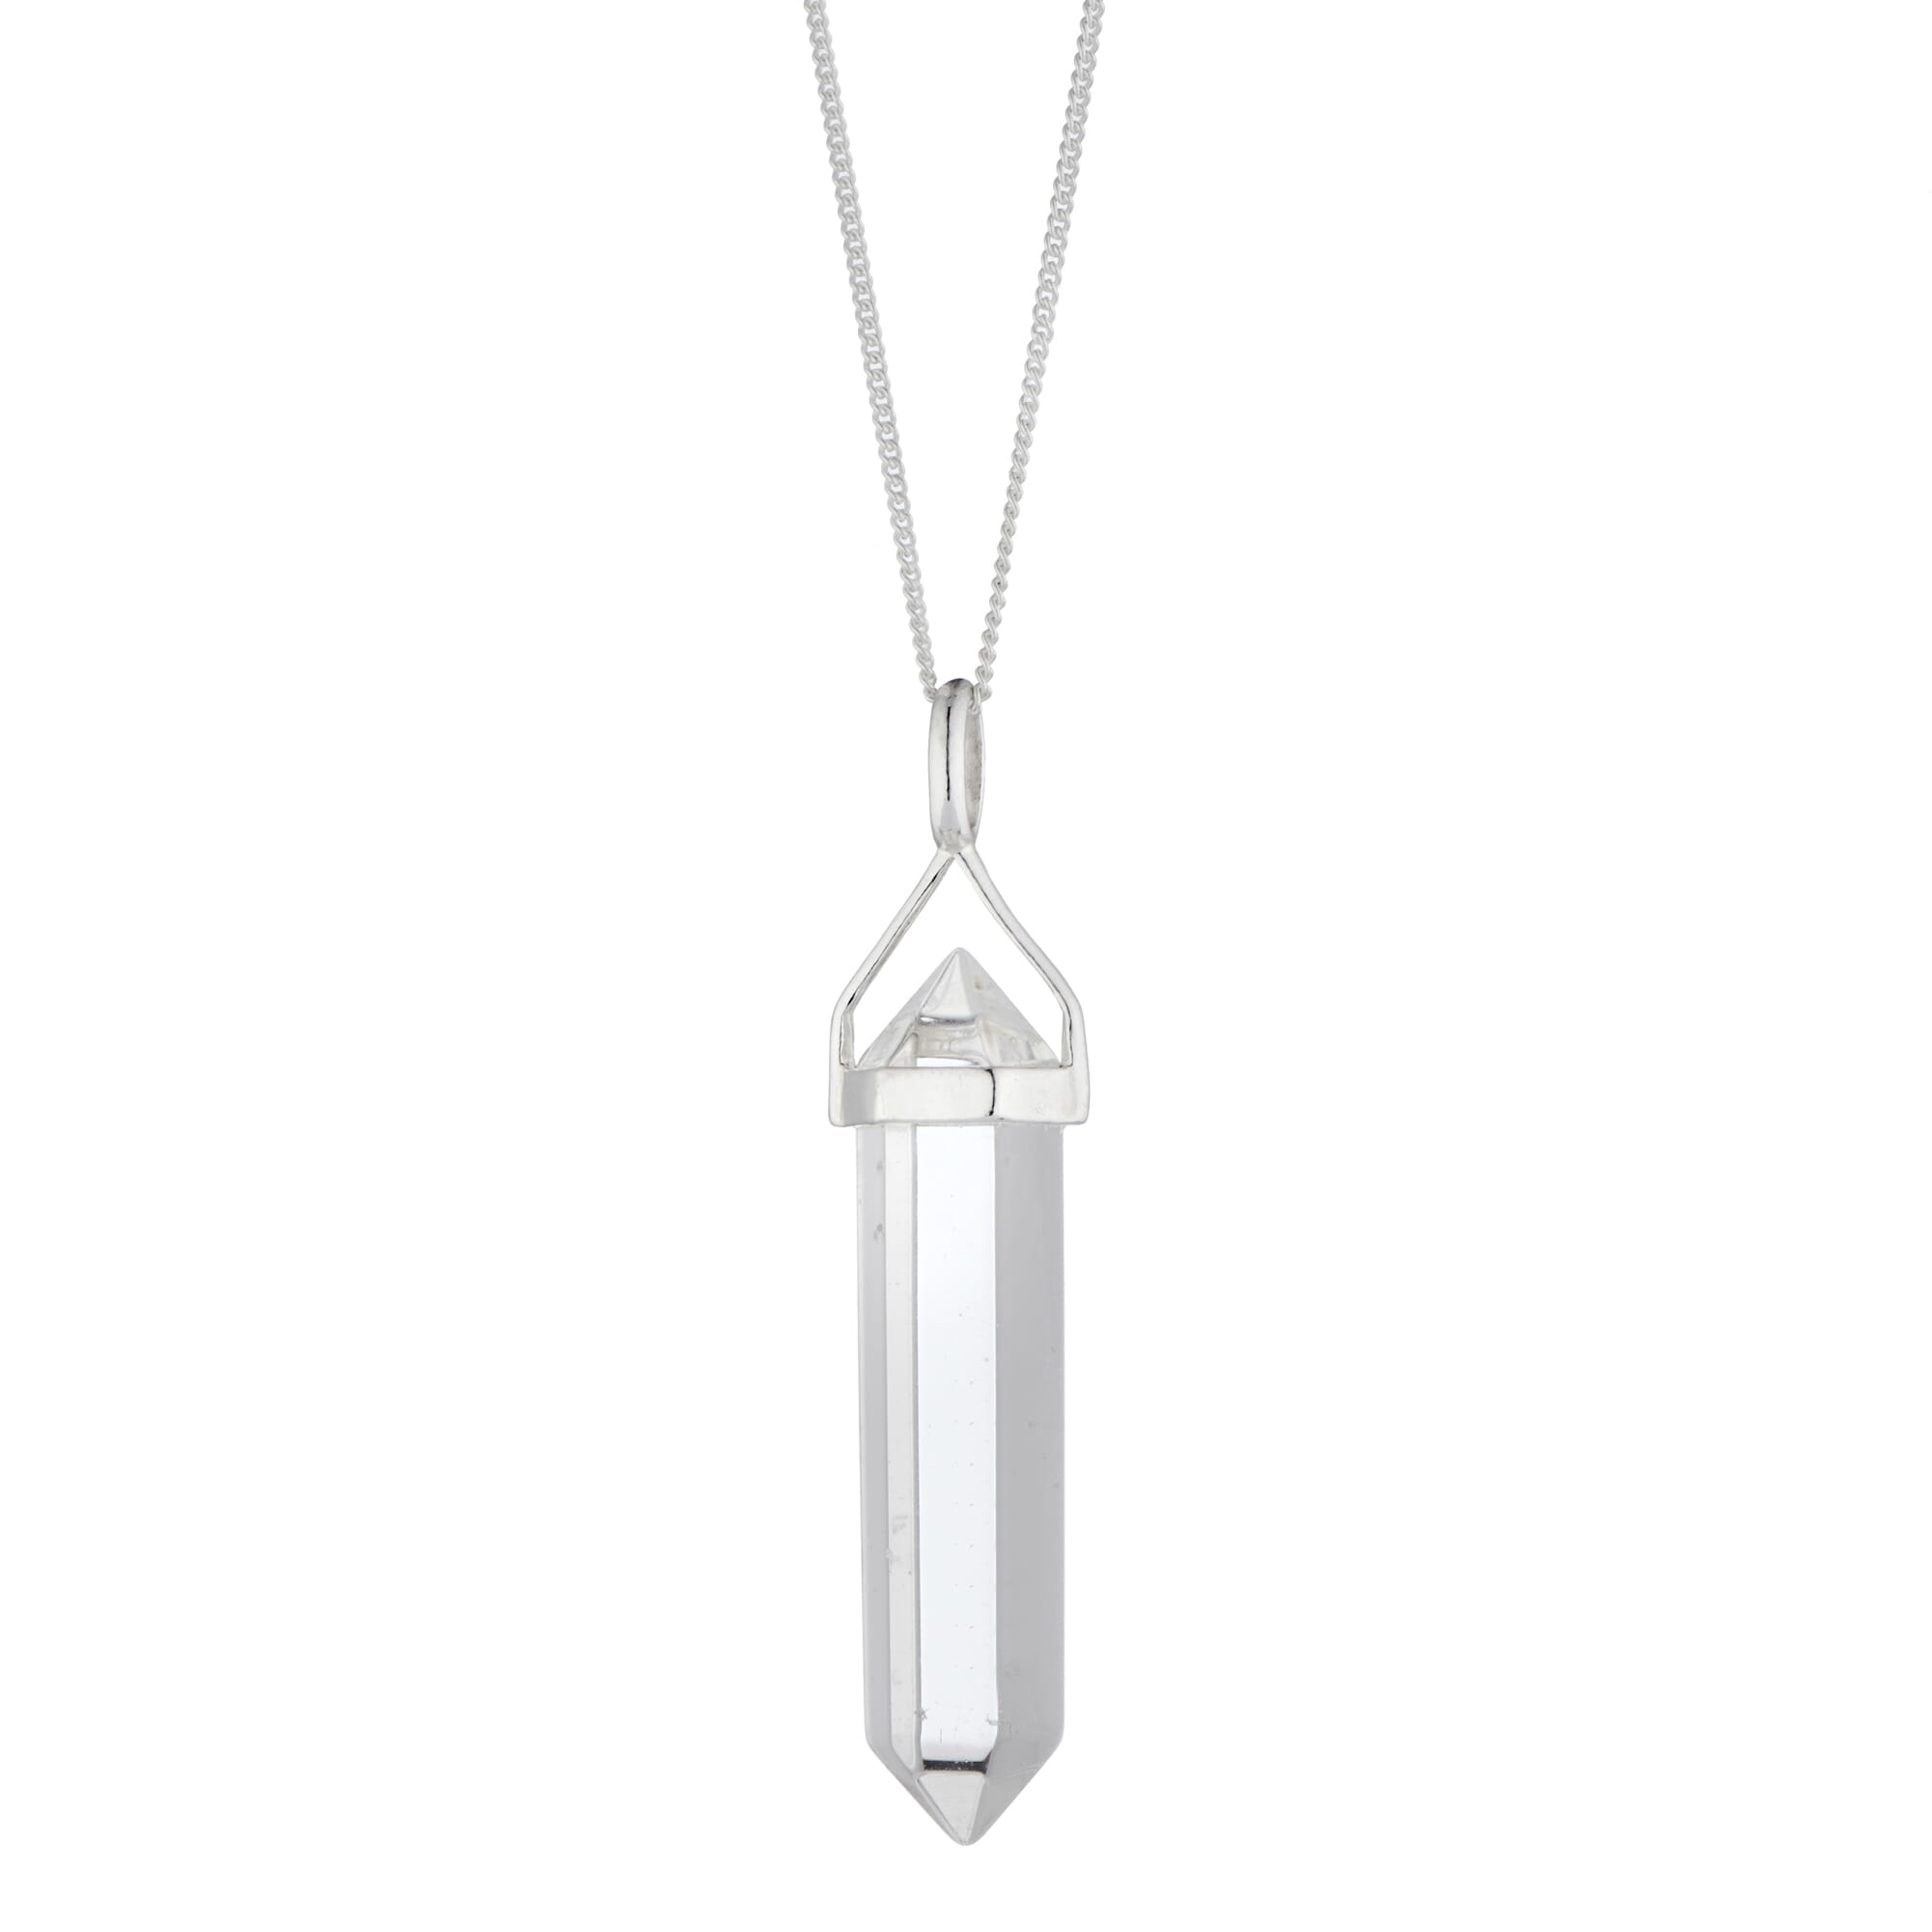 Mens Chunky 925 Sterling Silver Longer Length Raw Crystal Pendant Necklace  | Crystal Jewellery | Crystal Necklace | Quartz Necklace by Xander Kostroma